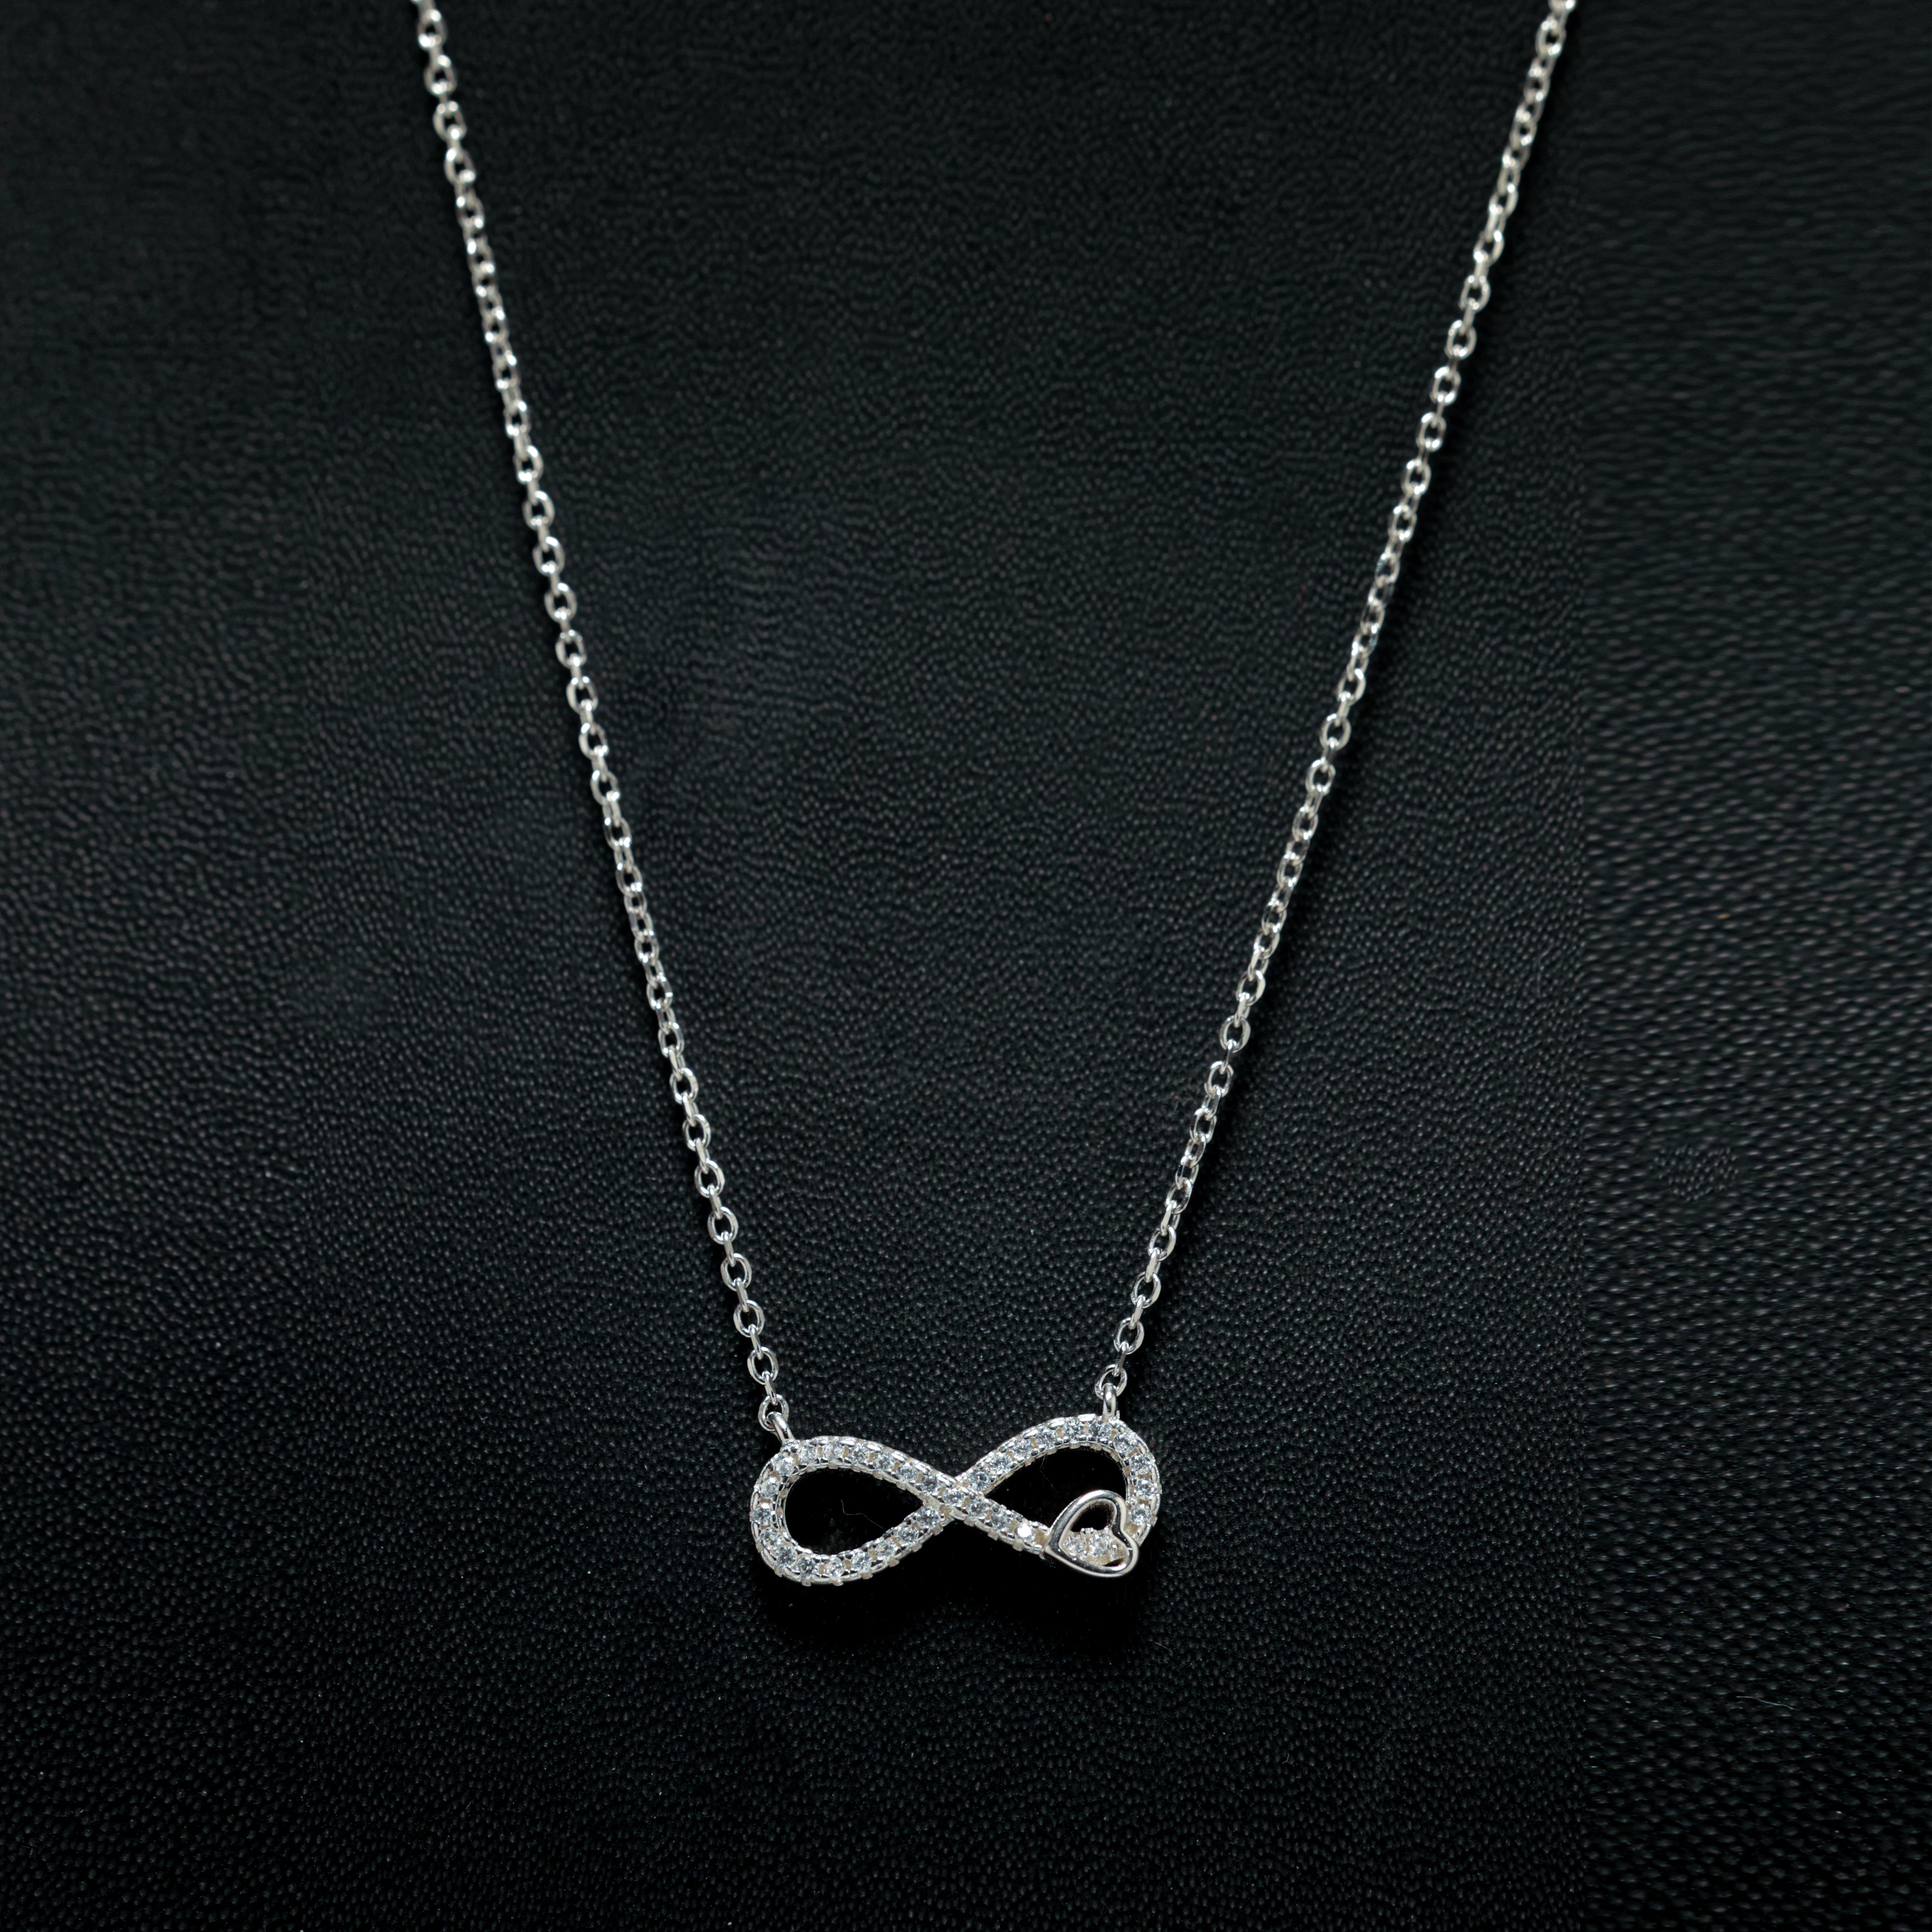 Infinity Silver Necklace